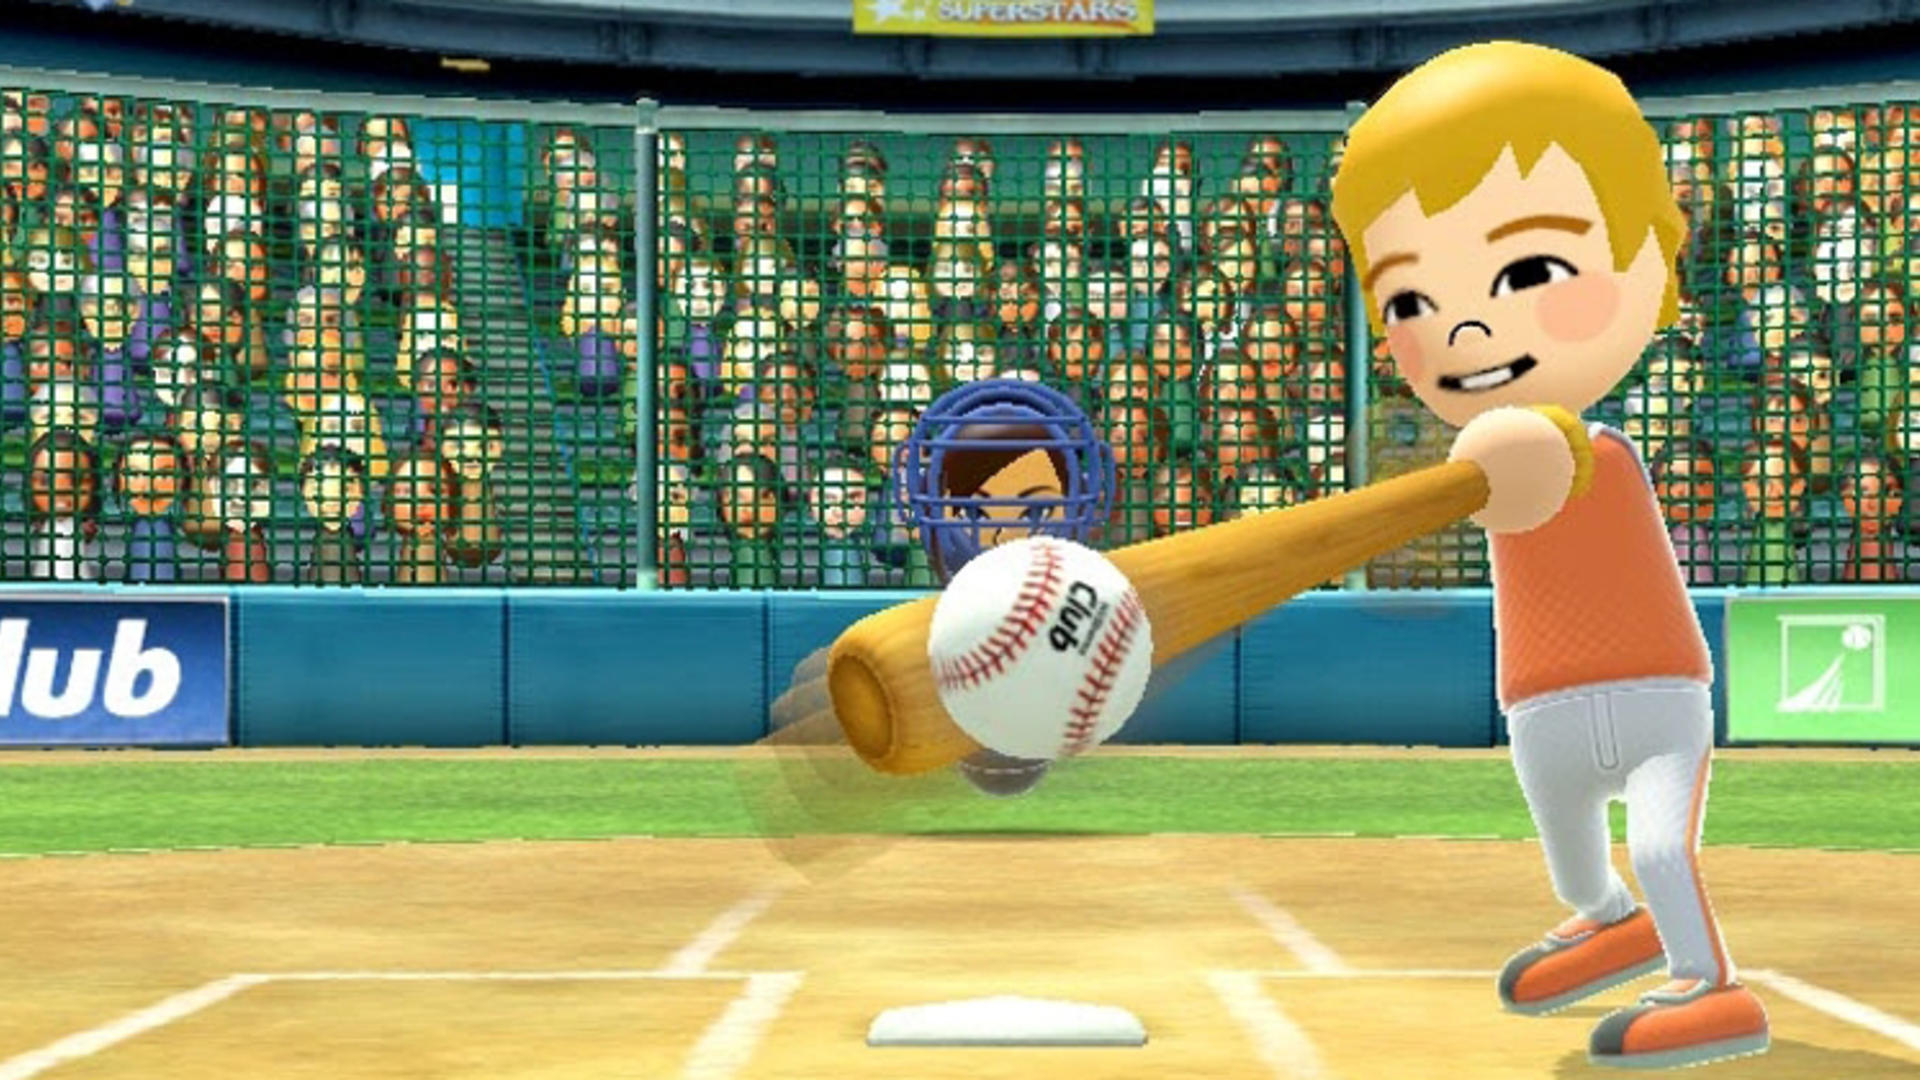 Wii sports announcer